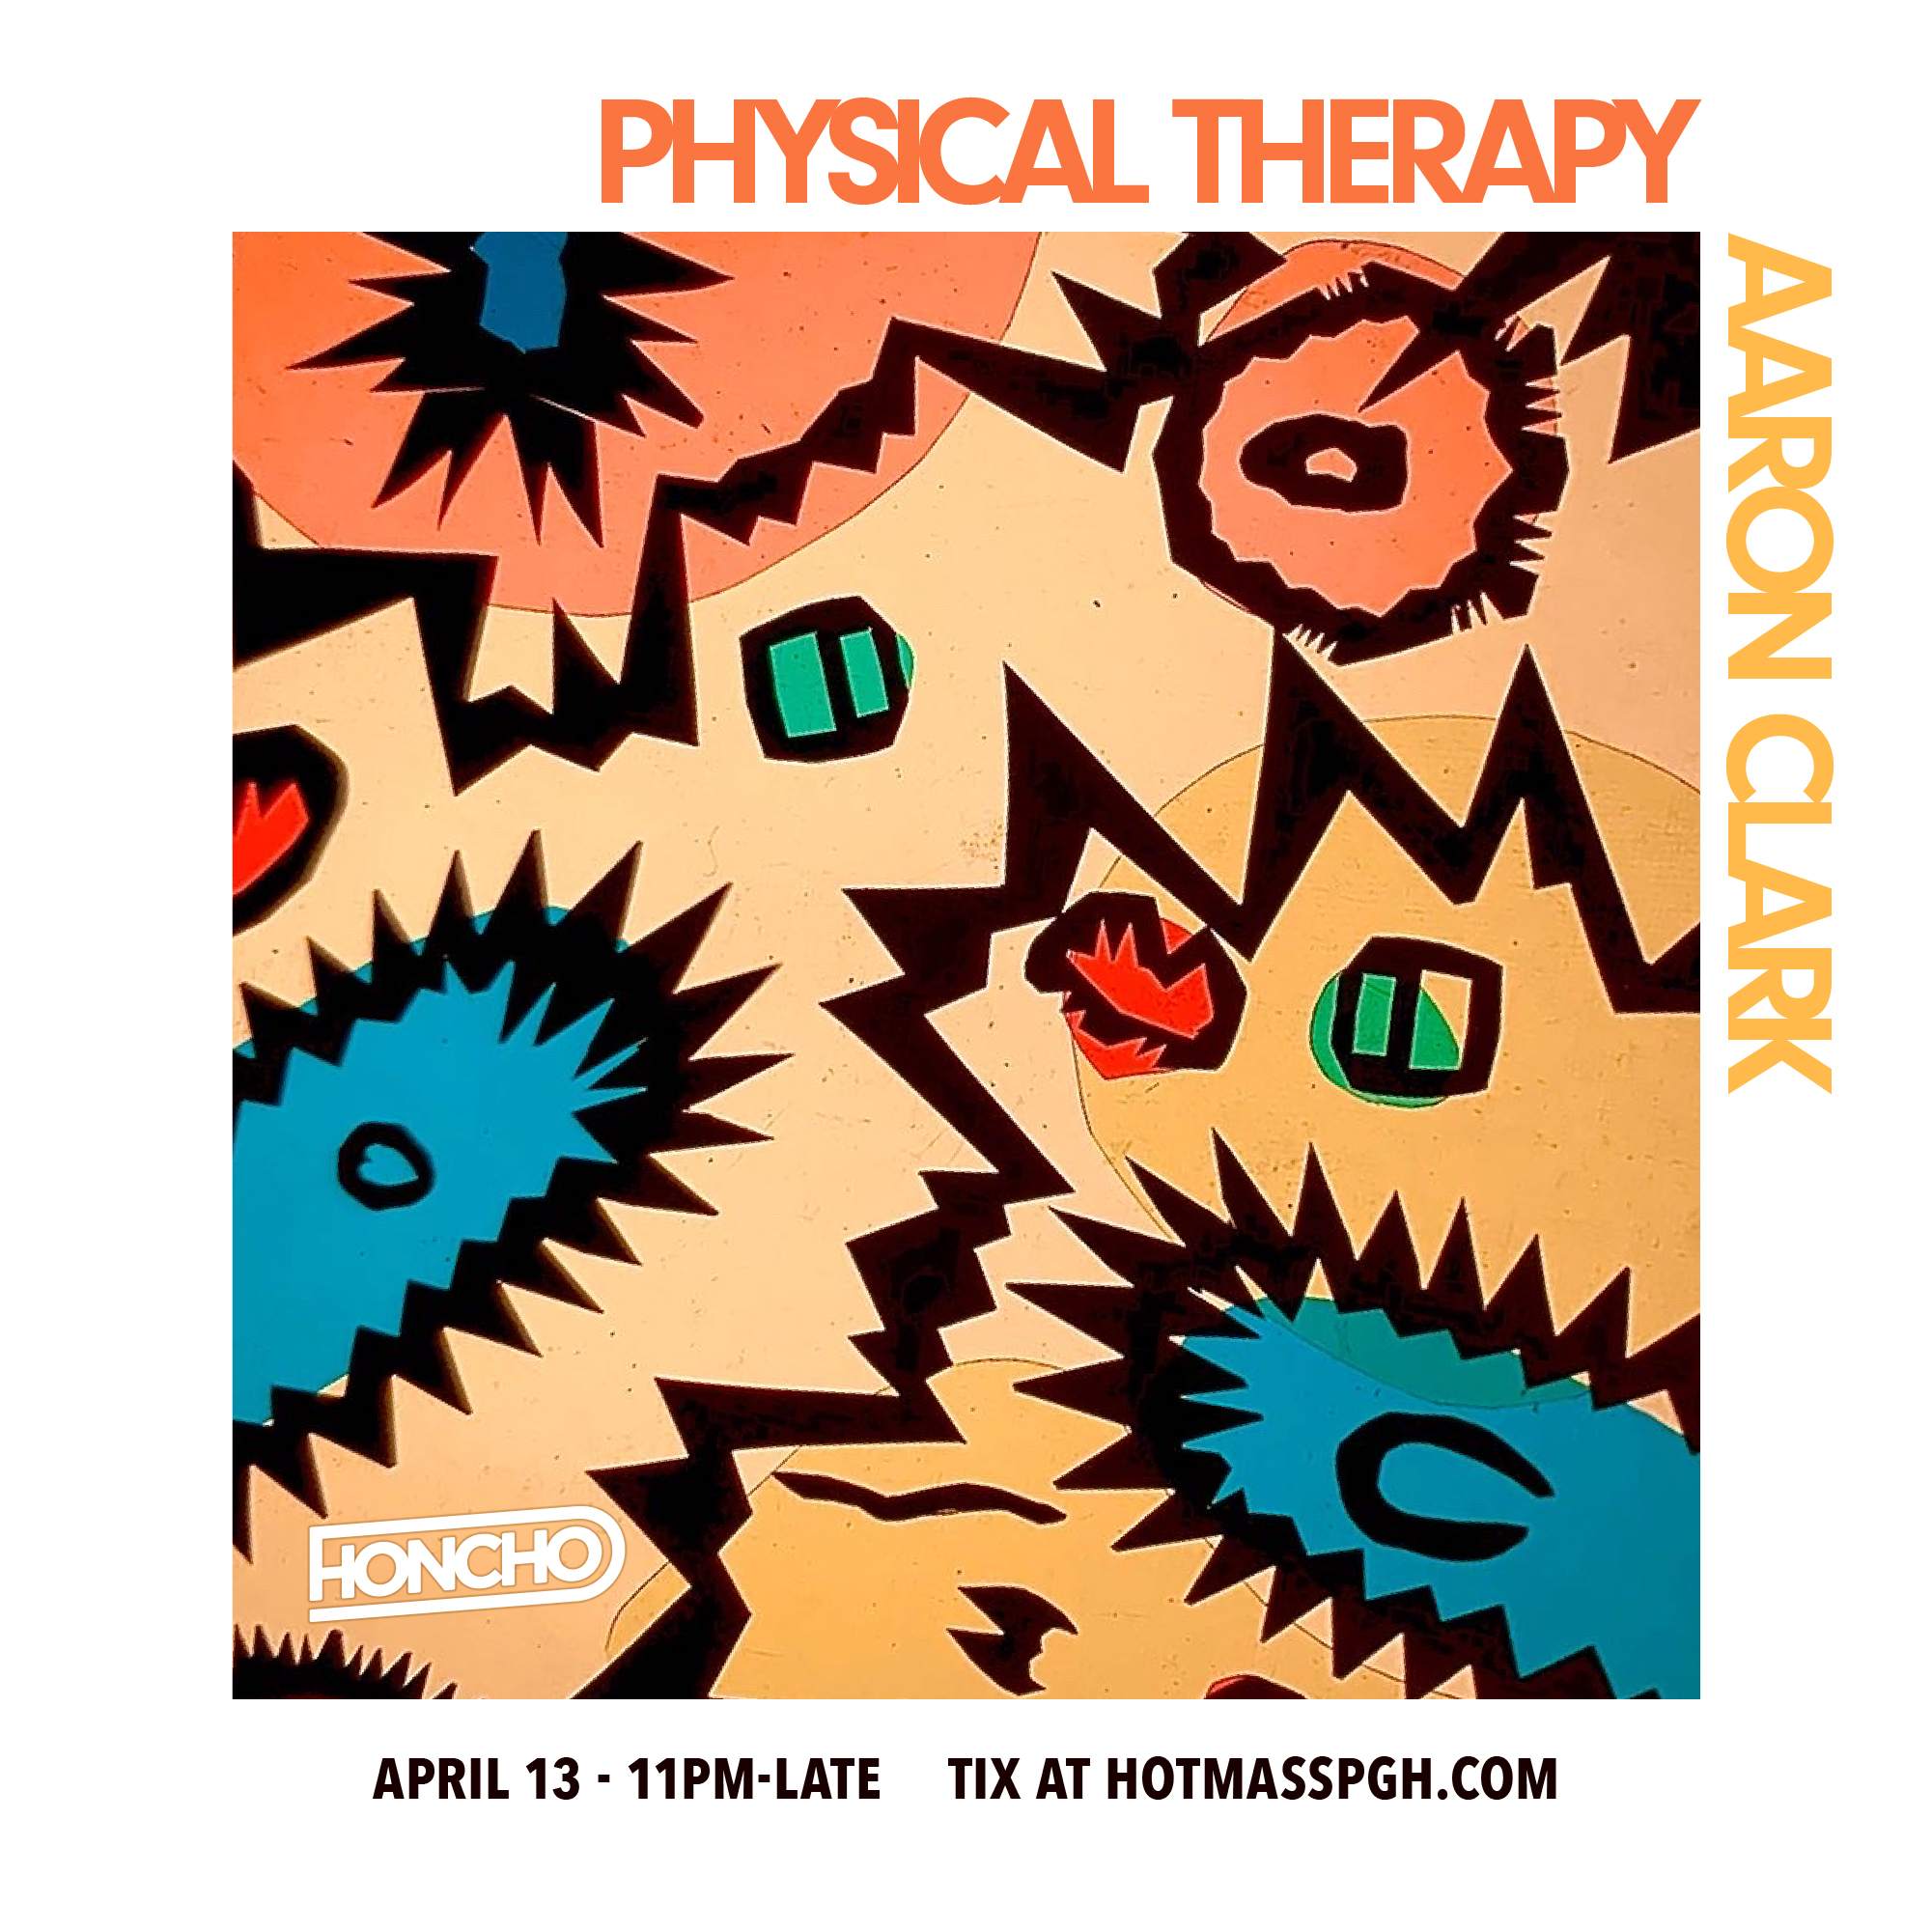 Honcho with Physical Therapy & Aaron Clark - Página frontal